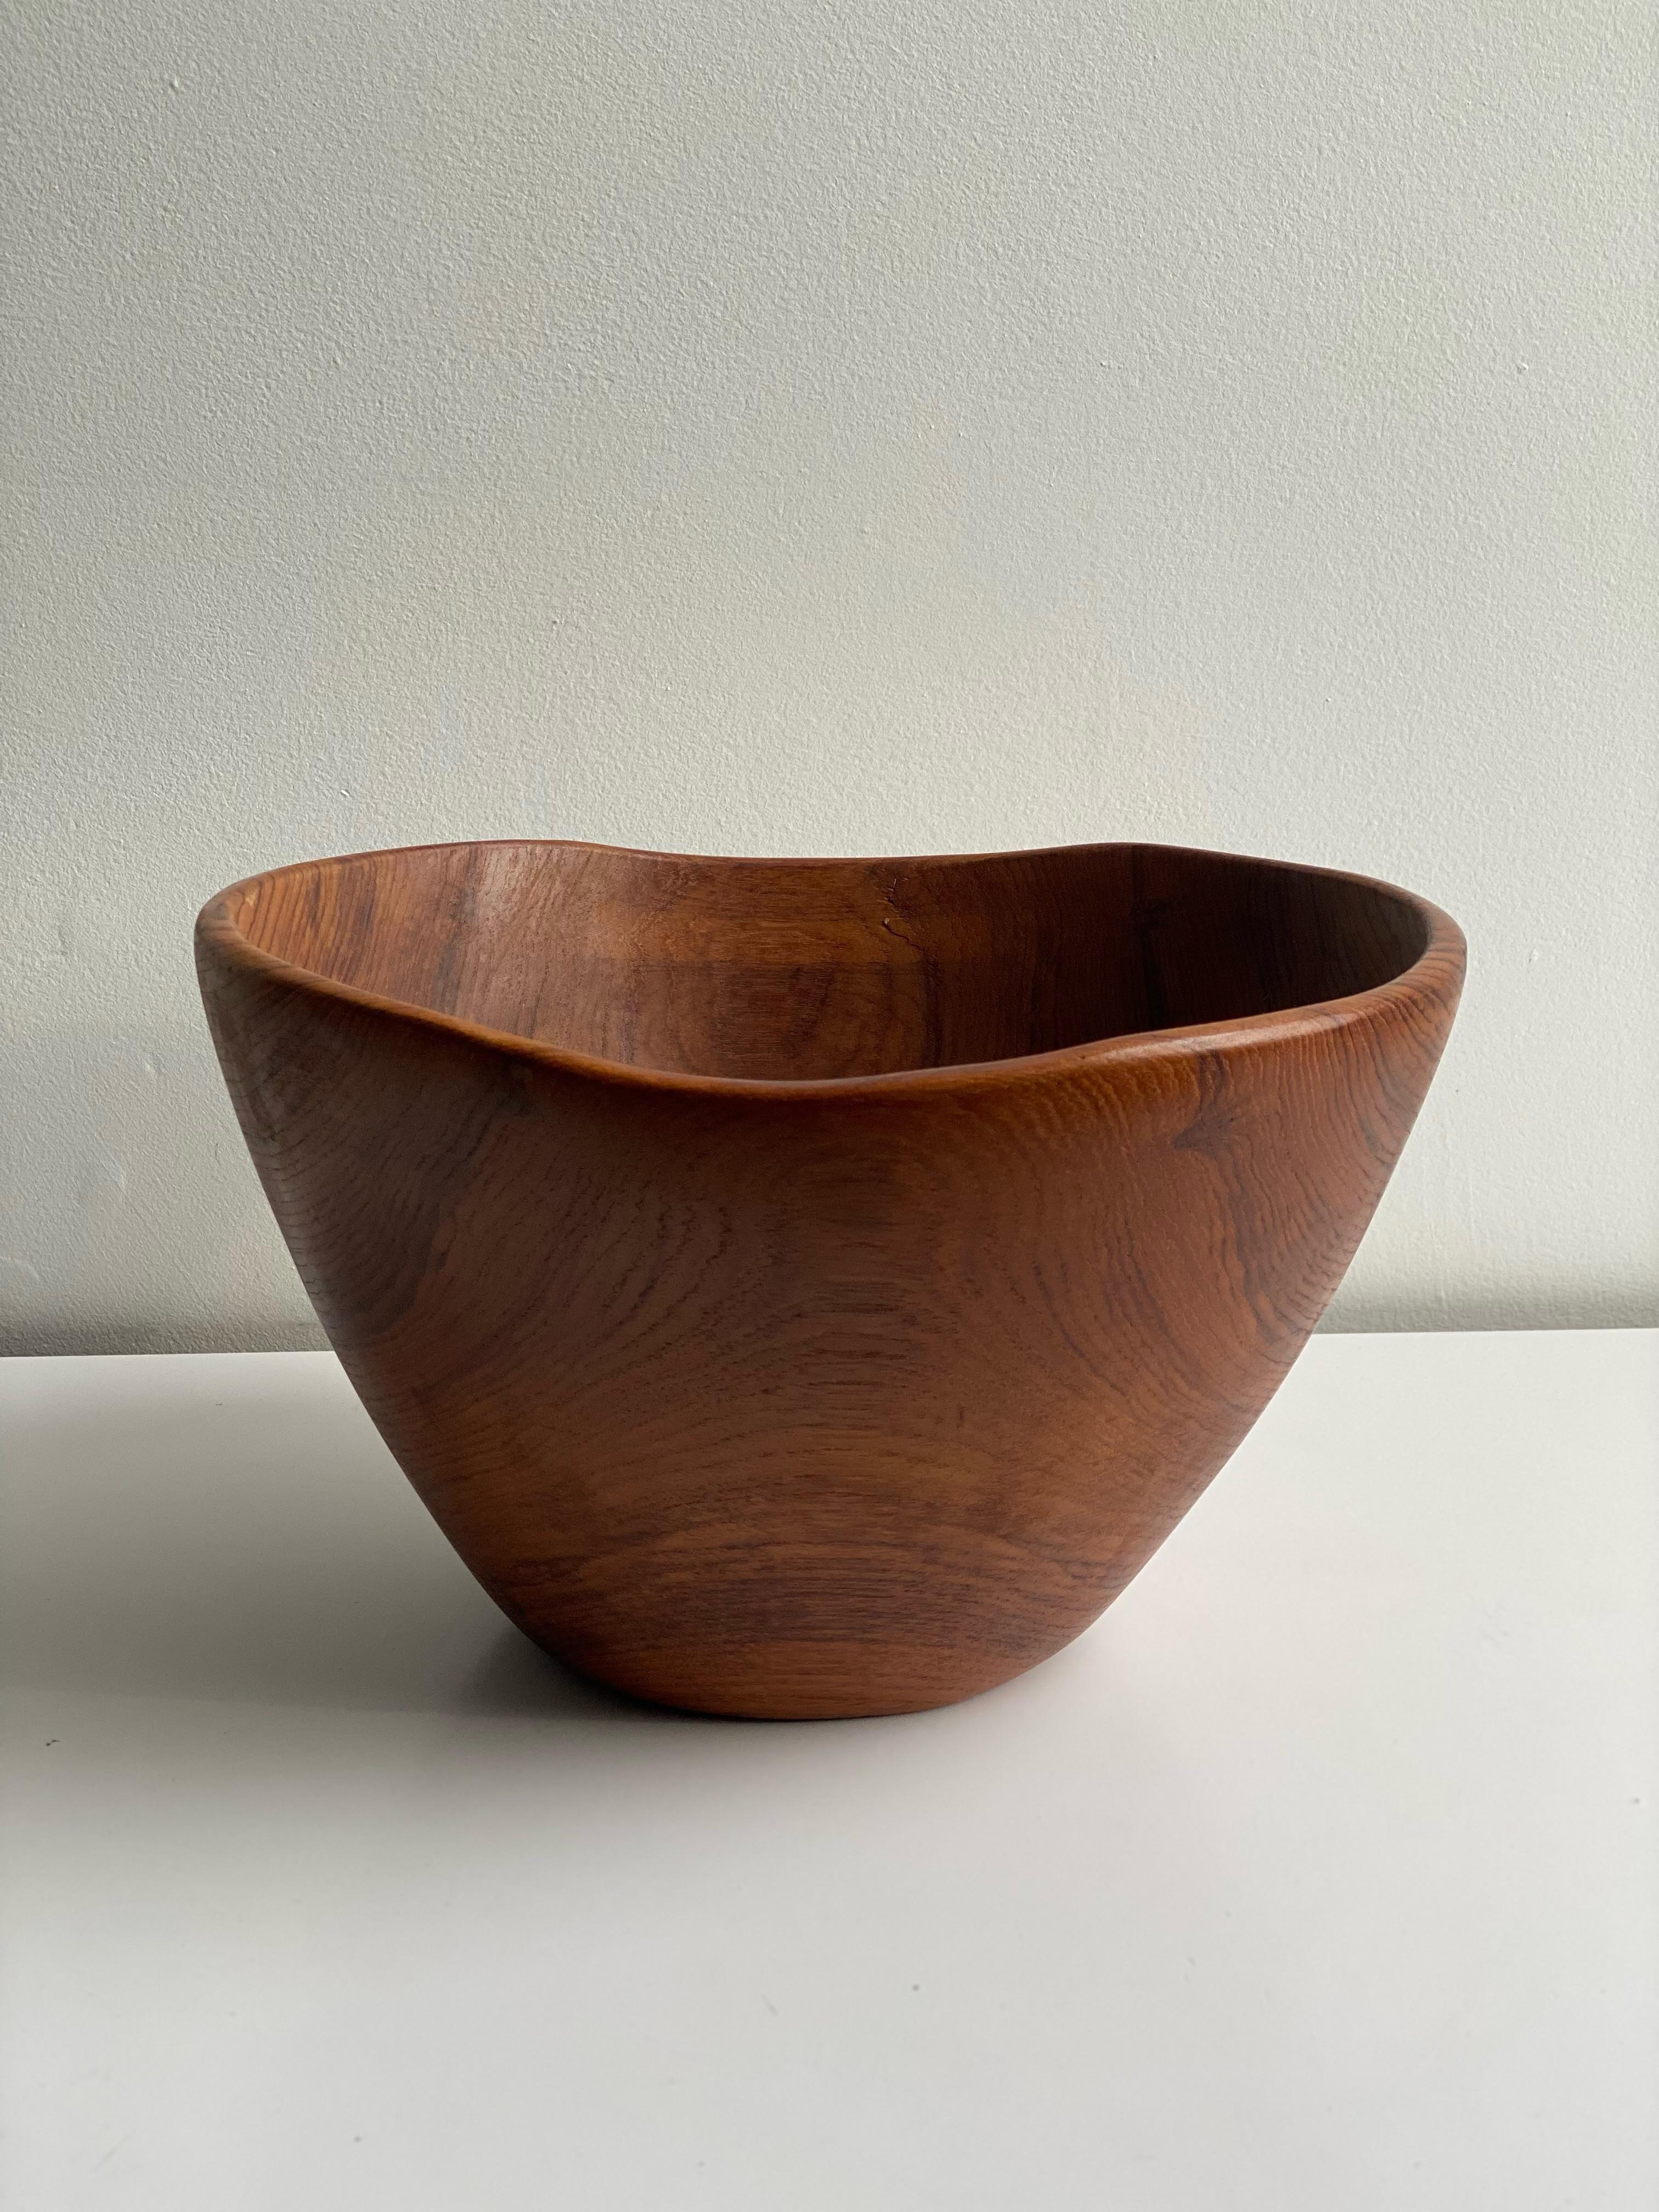 Large solid teak bowl, hand turned. Can be used decoratively or as serve ware.